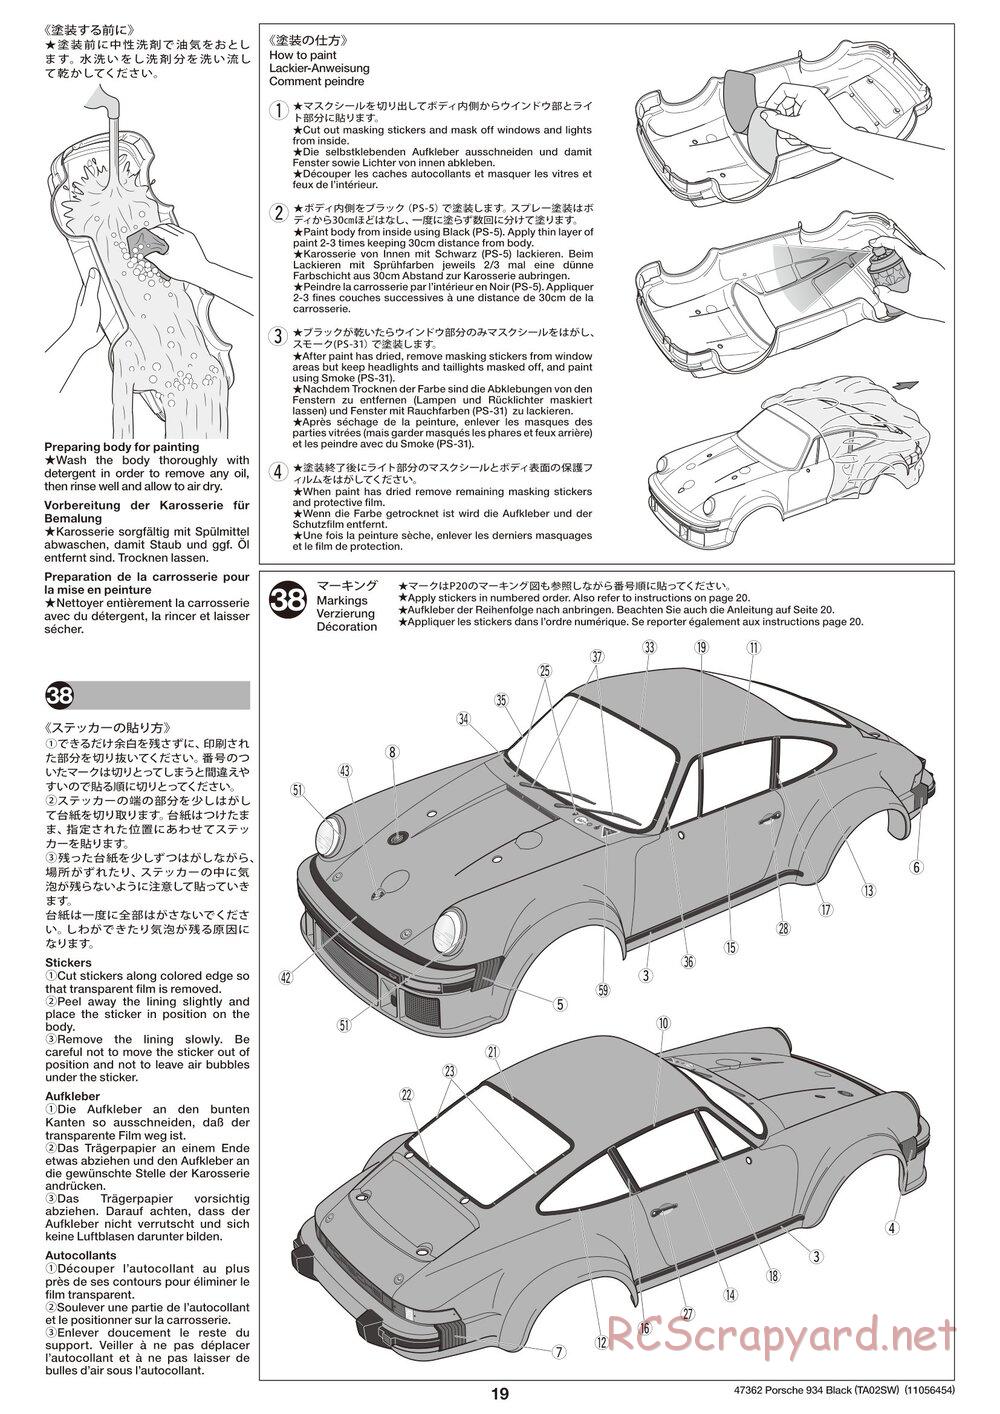 Tamiya - TT-02 White Special Chassis - Manual - Page 19